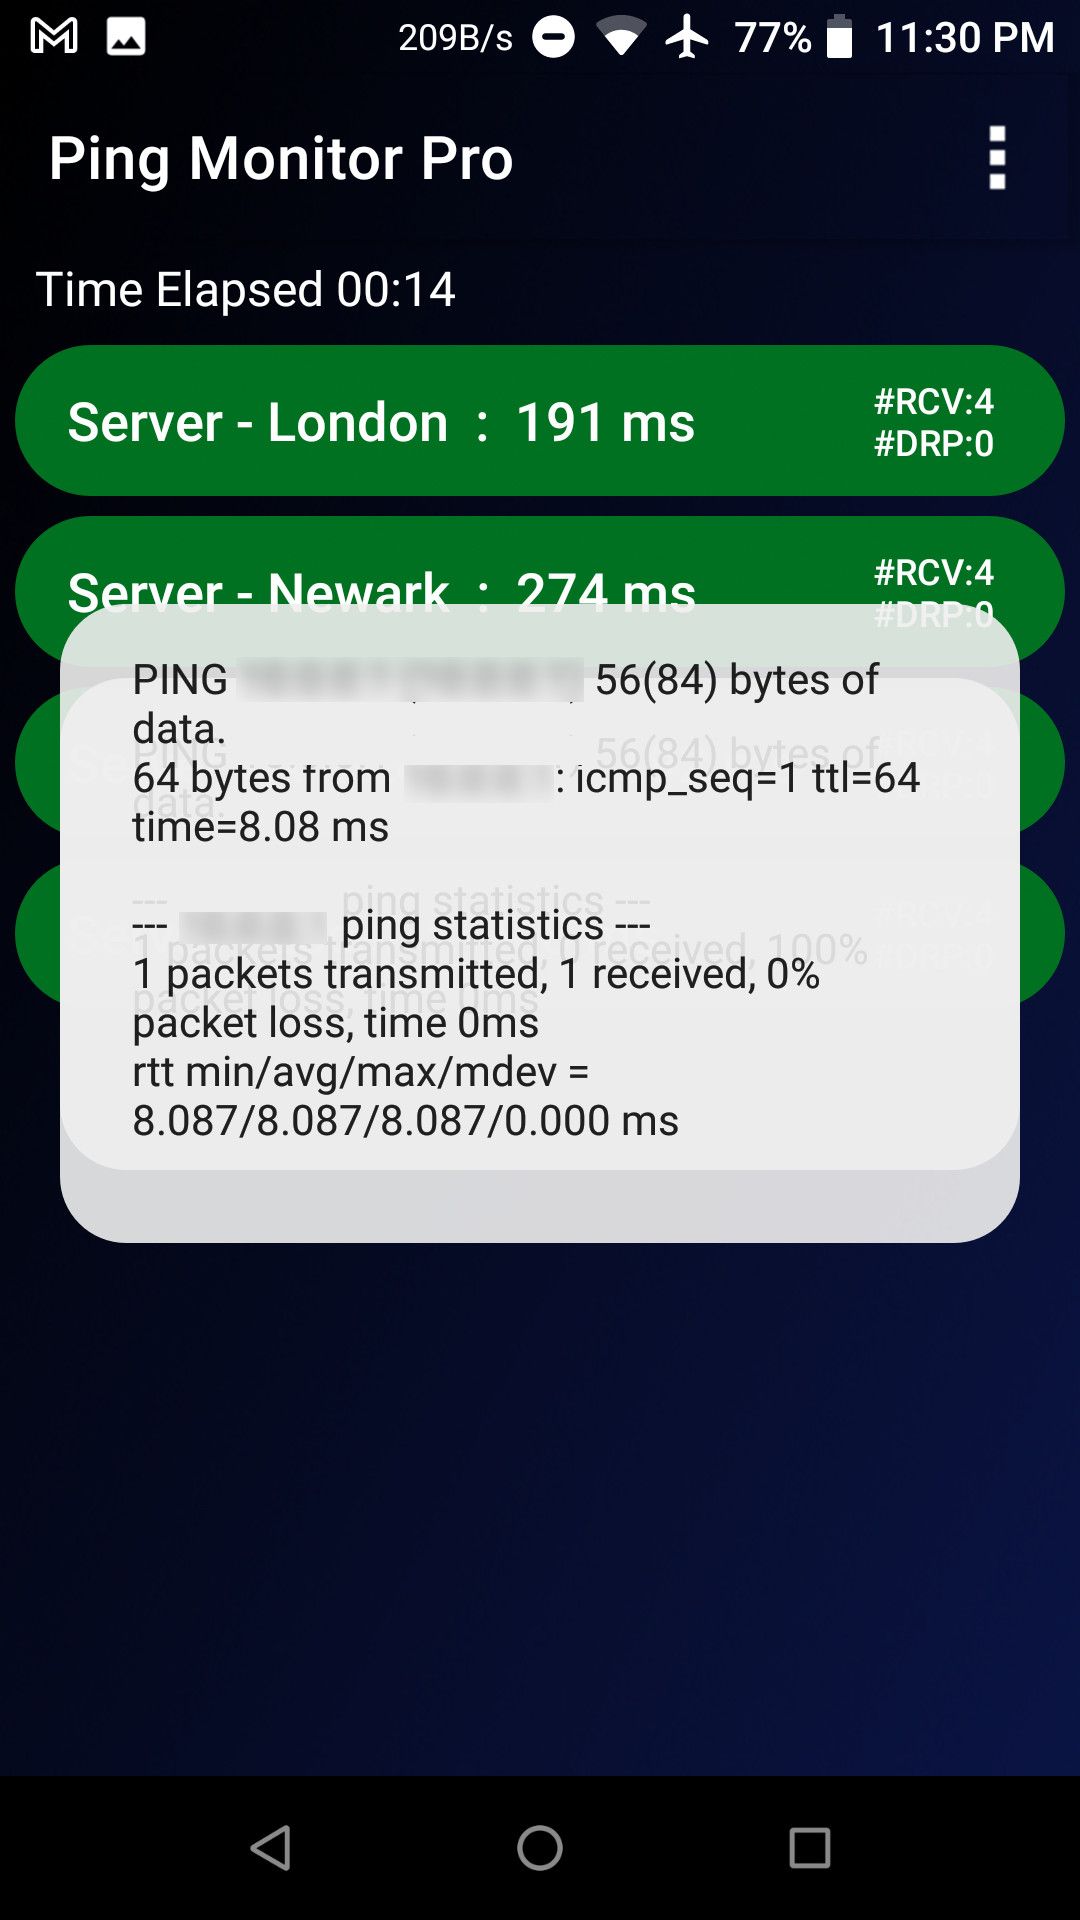 Ping monitor pro showing ping results of a single server